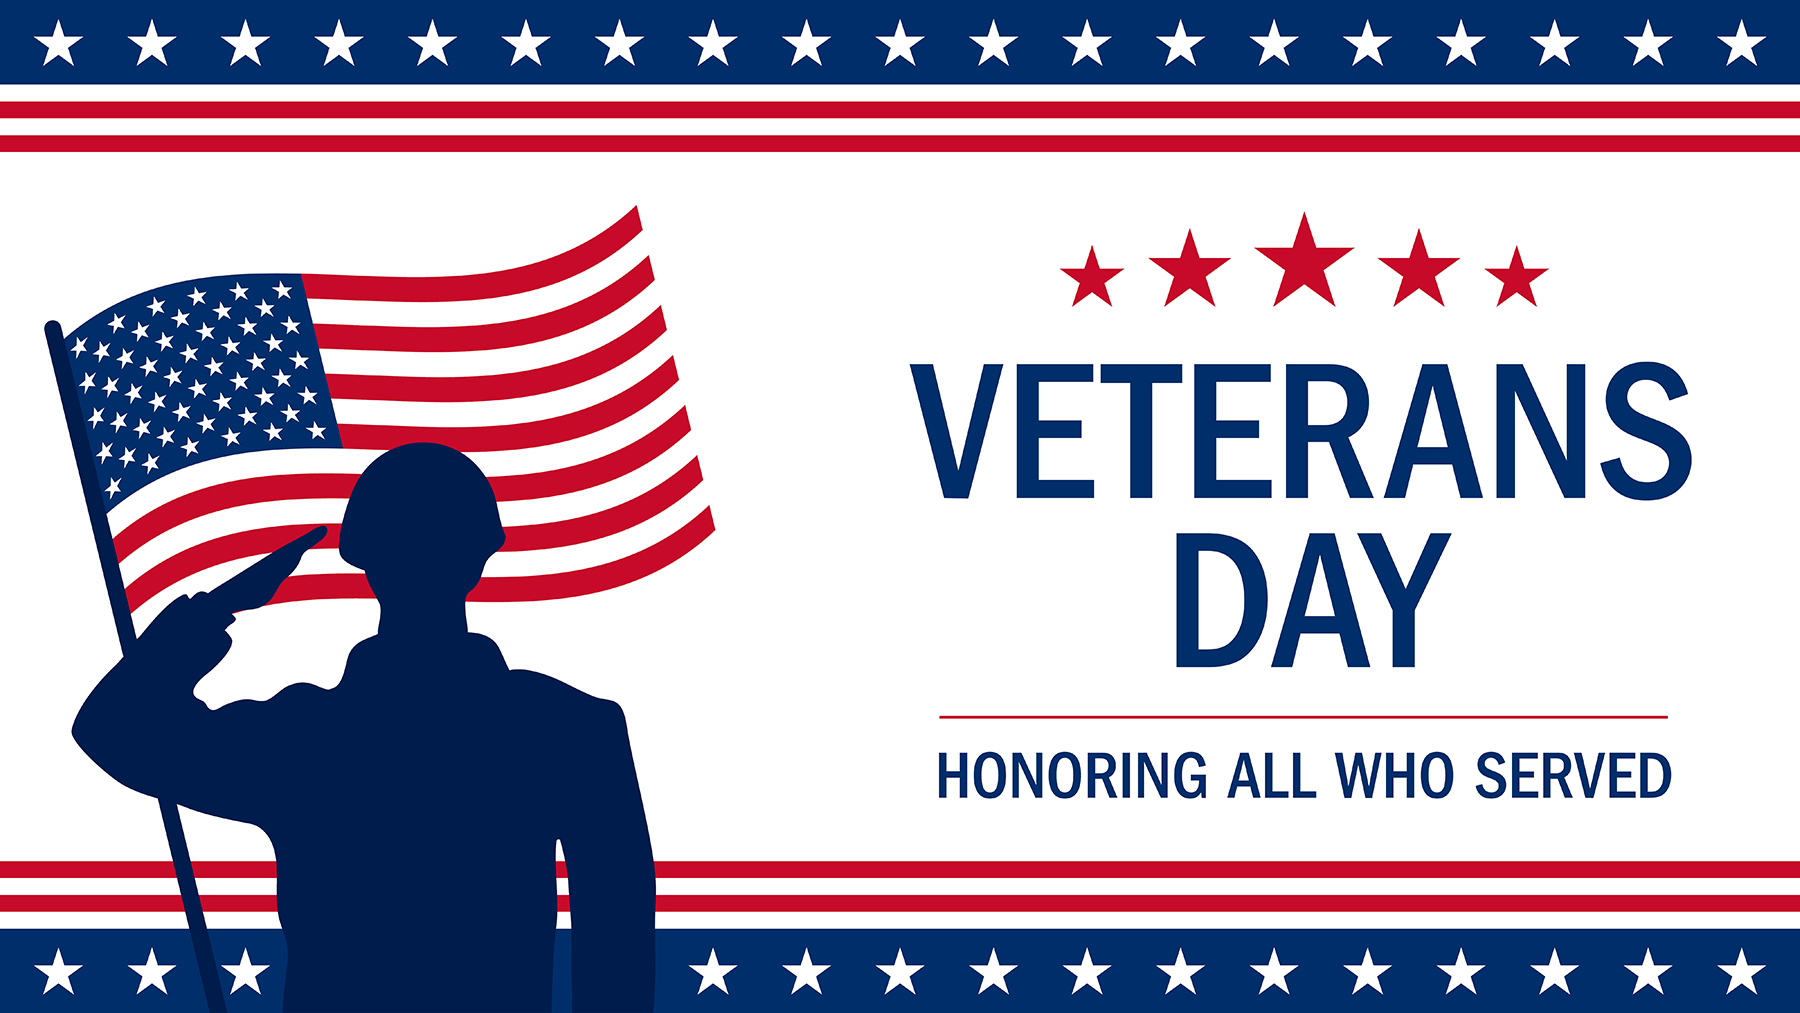 Veterans Day 2021: Honoring All Who Served